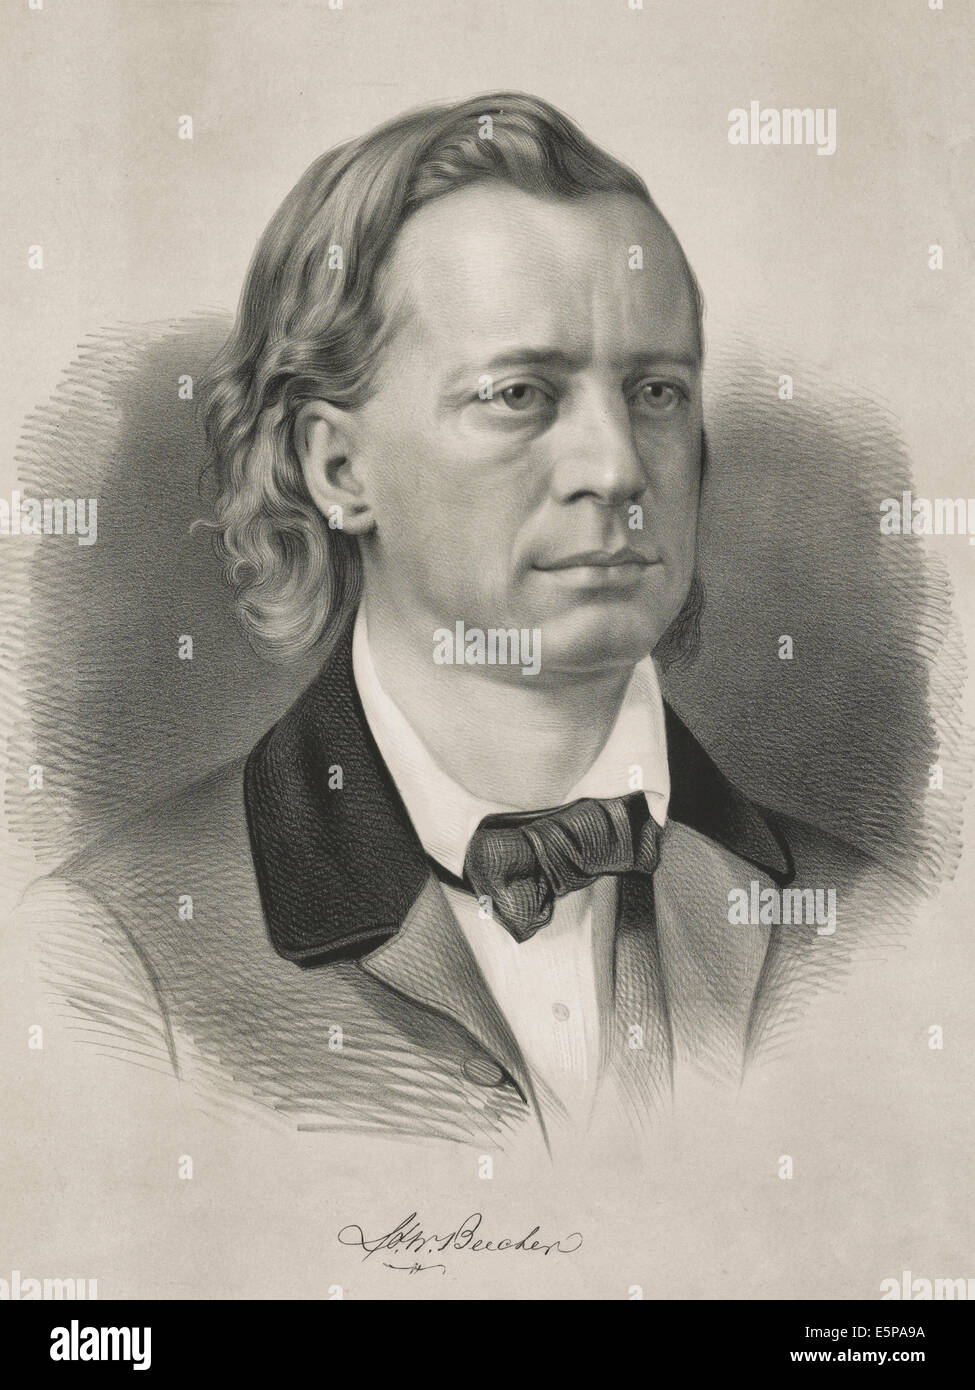 Henry Ward Beecher (June 24, 1813 – March 8, 1887) was an American Congregationalist clergyman, social reformer, and speaker, known for his support of the abolition of slavery, his emphasis on God's love, and his 1875 adultery trial. Stock Photo